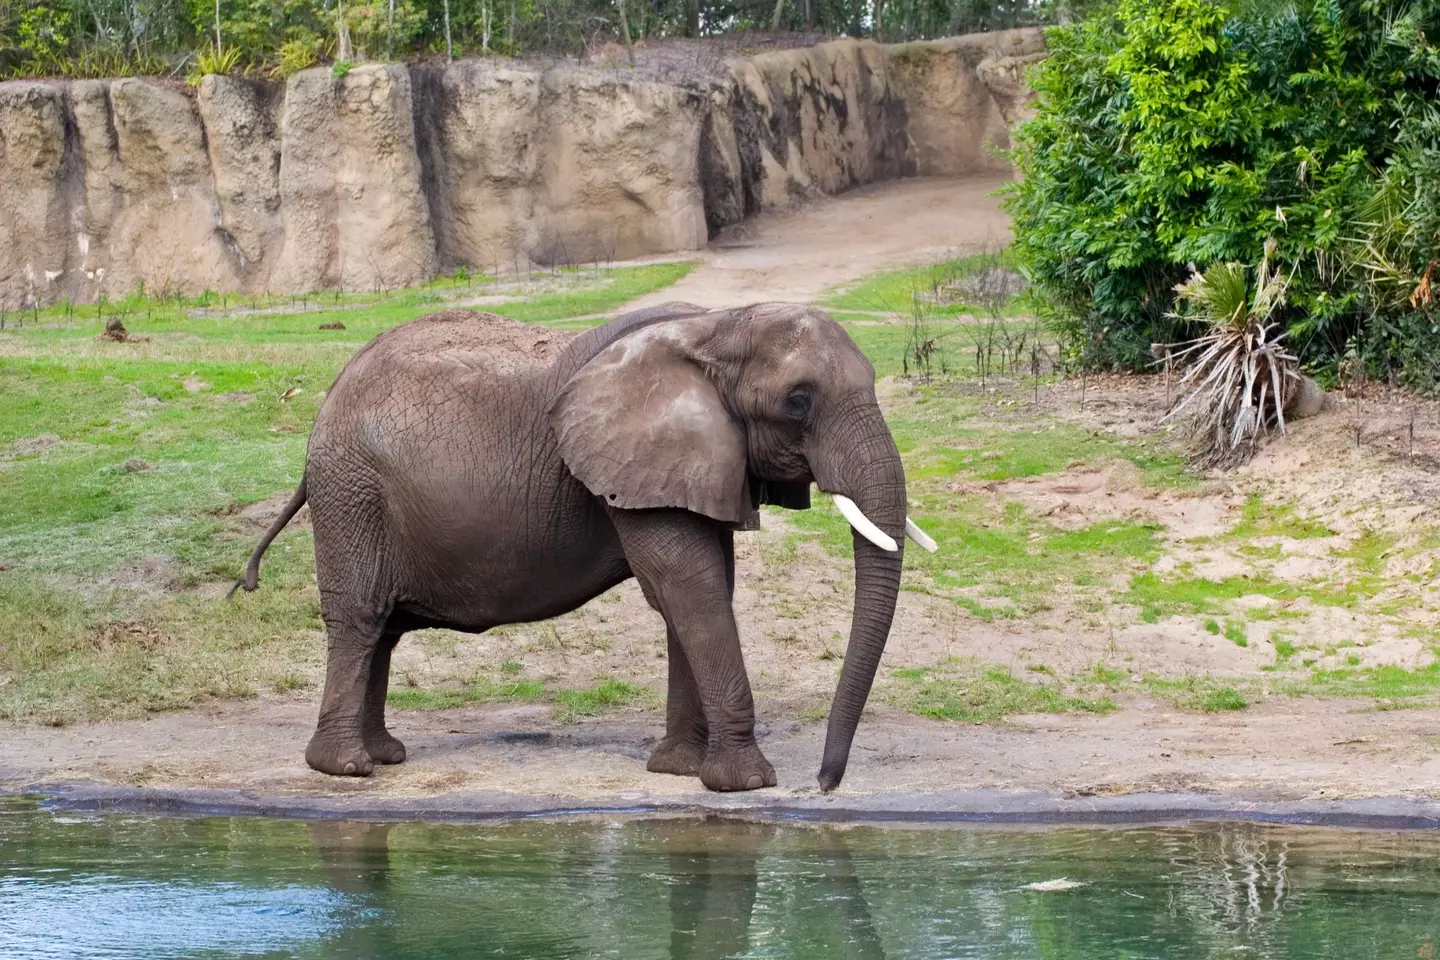 Born Free is calling on zoos to phase-out elephants.